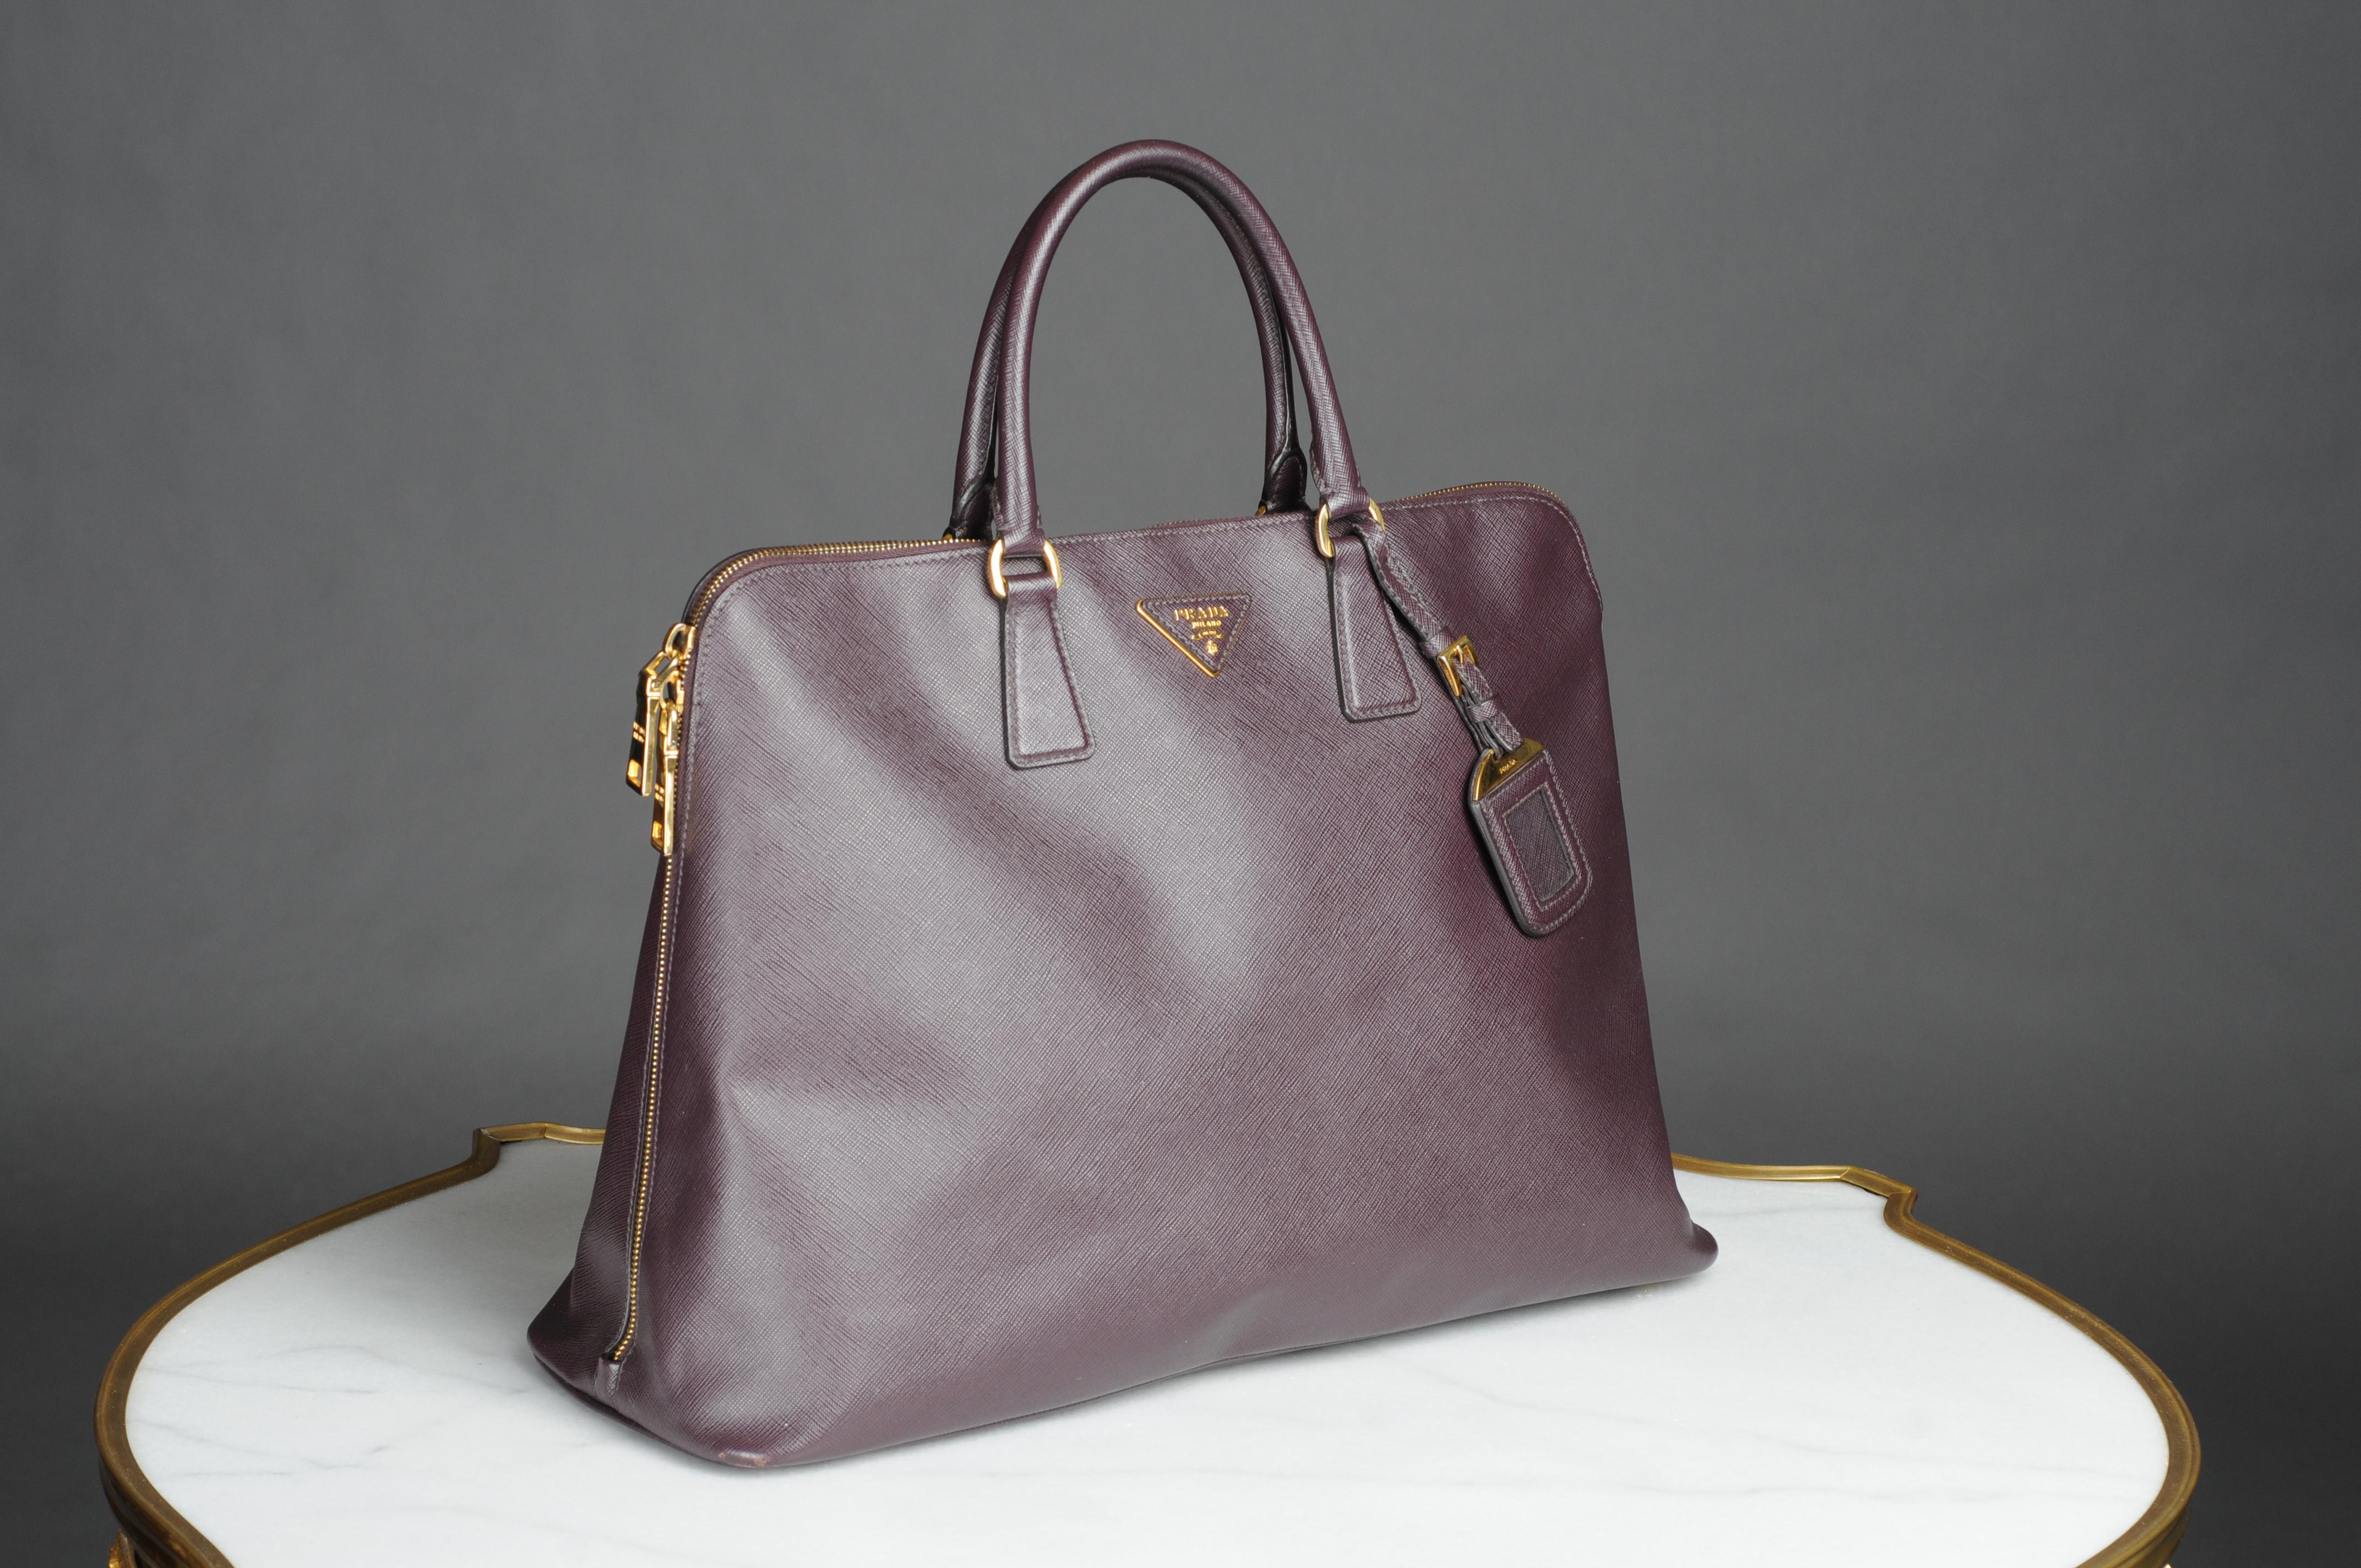 Prada Purple Saffiano Lux Leather Promenade Bag This stunning promenade bag impresses with its appeal and style. The bag shines in an elegant dark purple tone, is made of leather and has two rolled handles. The zipper leads to a nylon interior with